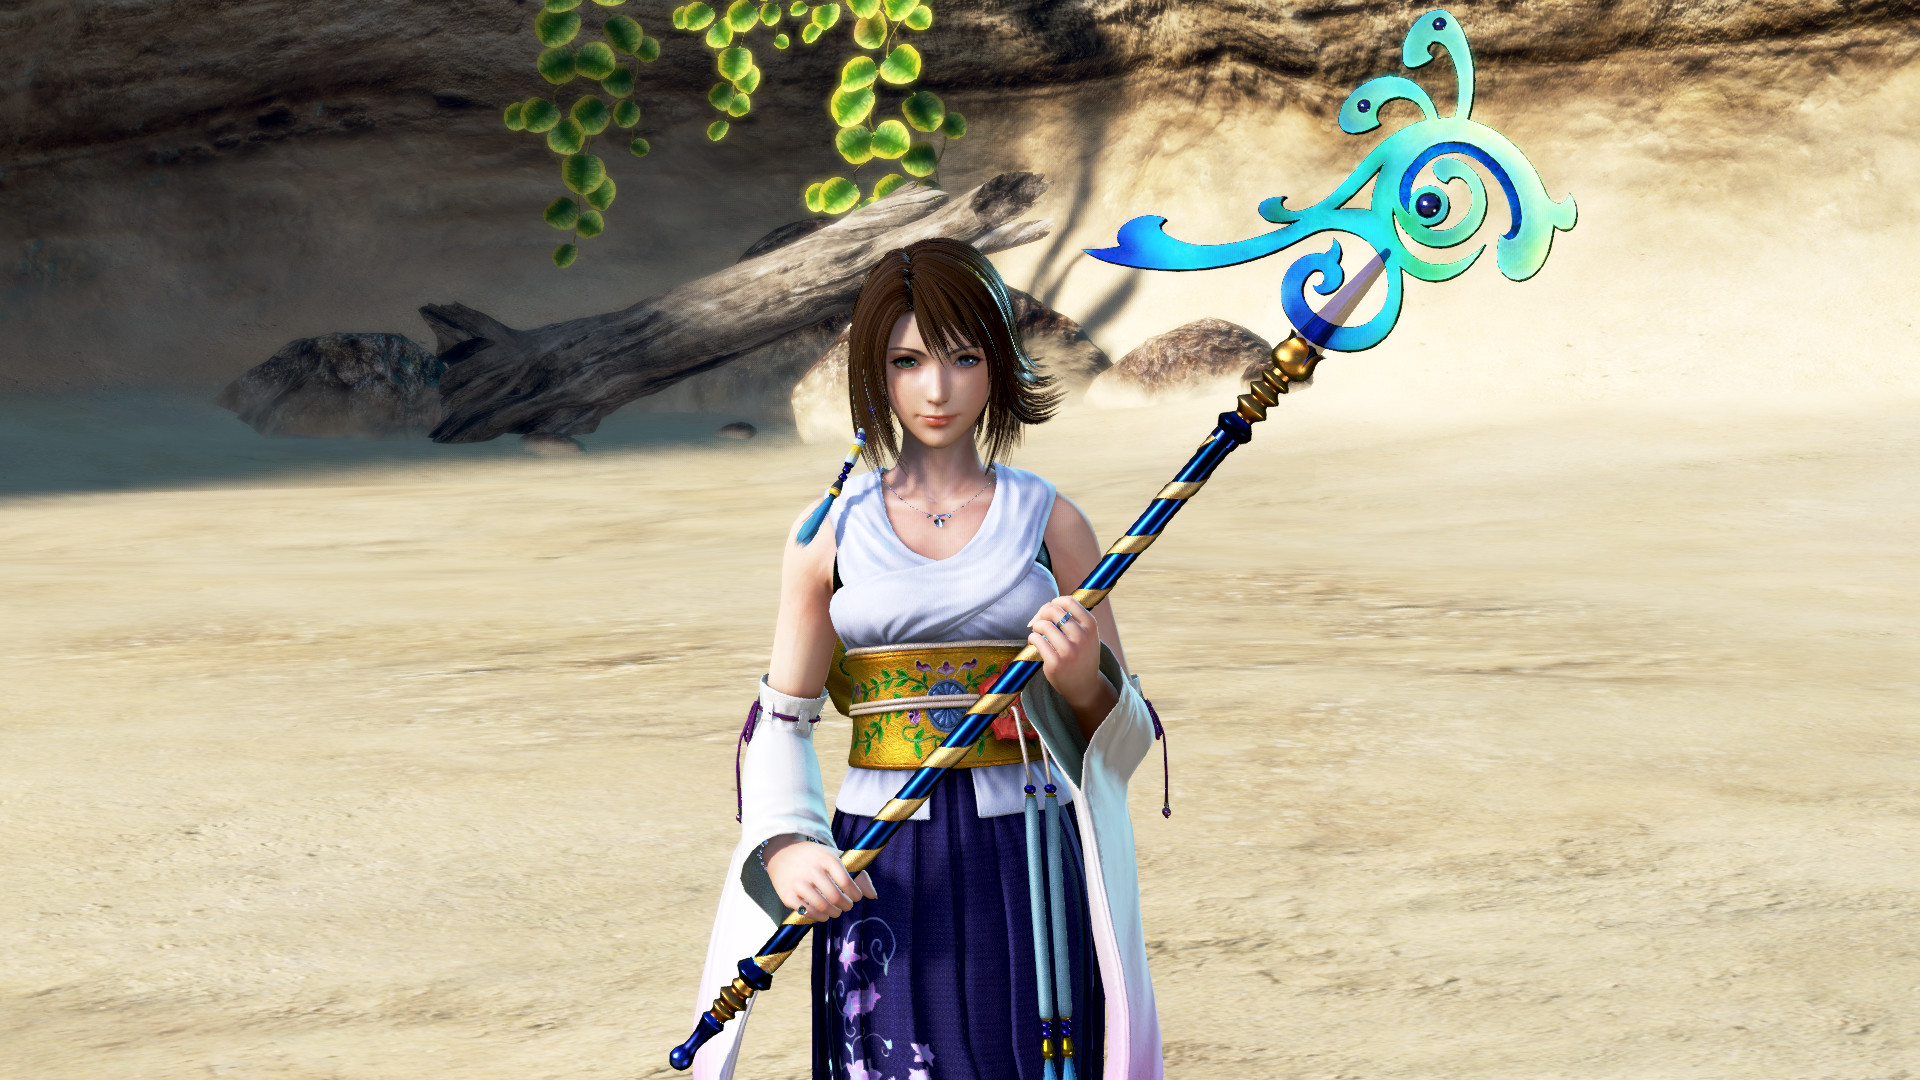 DFF NT: Astral Rod, Yuna's 4th Weapon Featured Screenshot #1